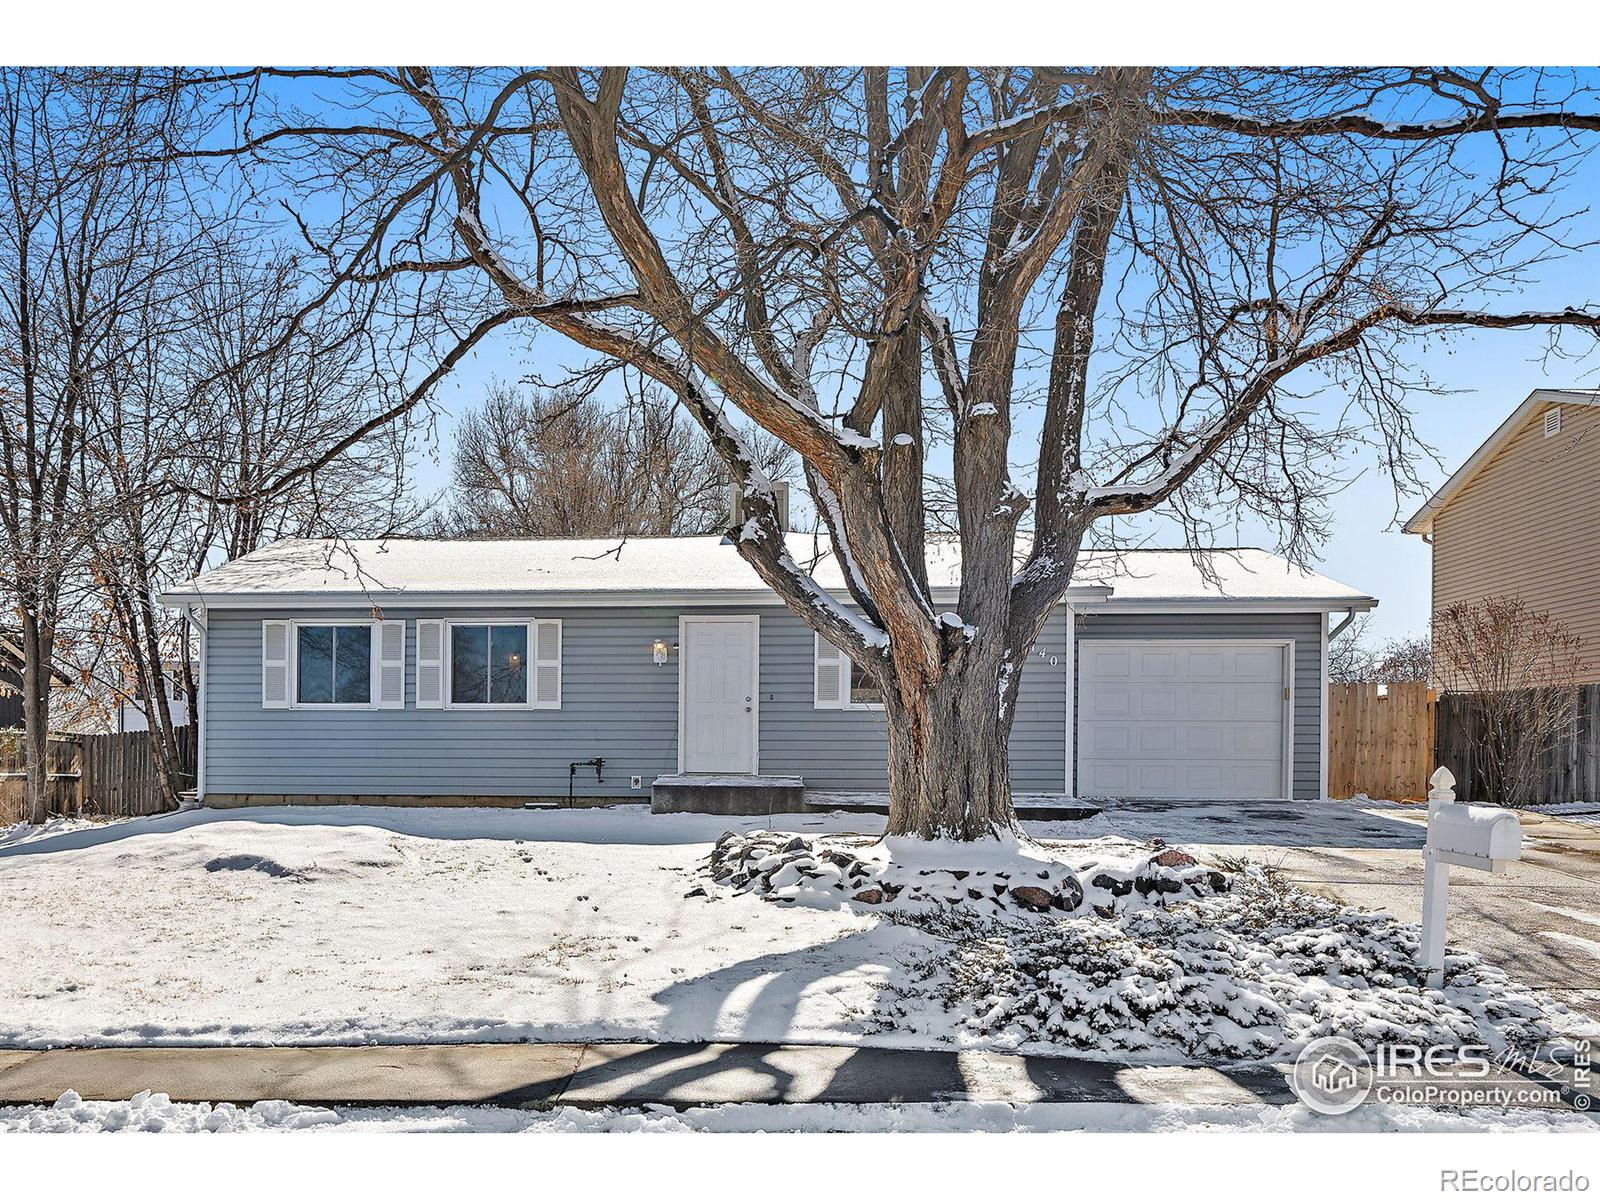 3140 w 133rd circle, Broomfield sold home. Closed on 2024-04-22 for $535,000.